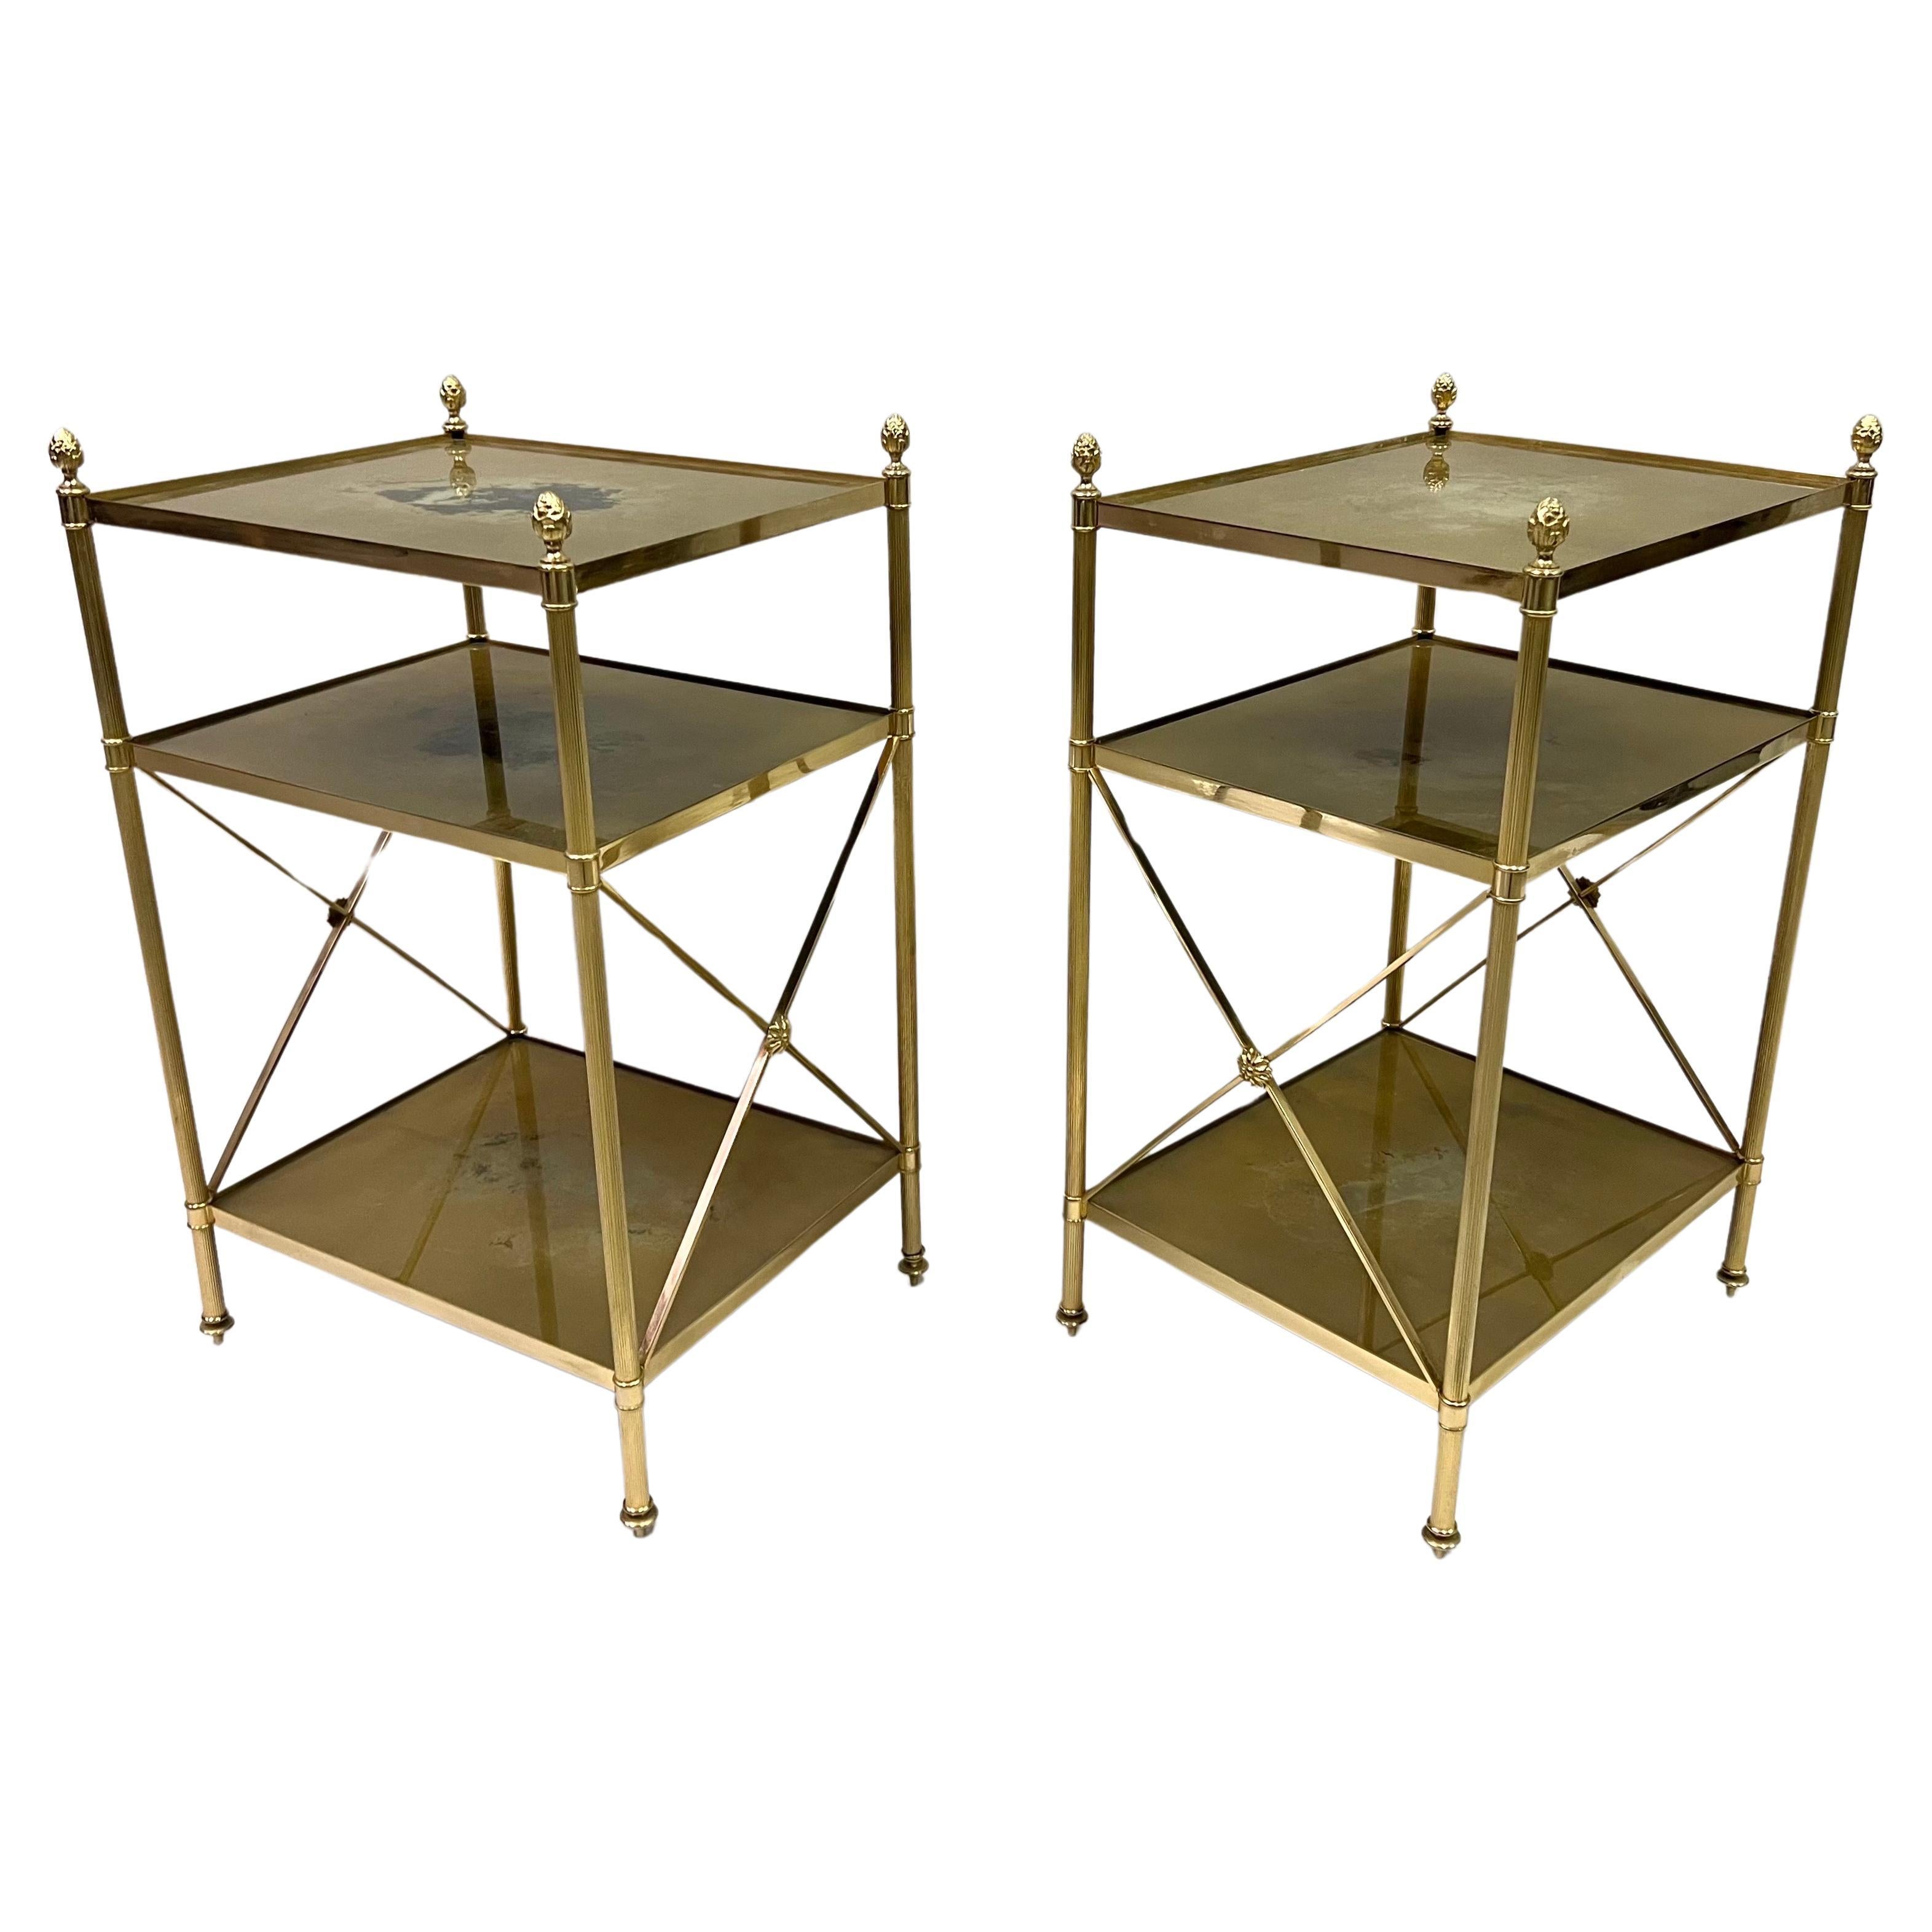 Pair of French Modern Neoclassical Brass & Verre Eglomisse 3 Tier Side Tables